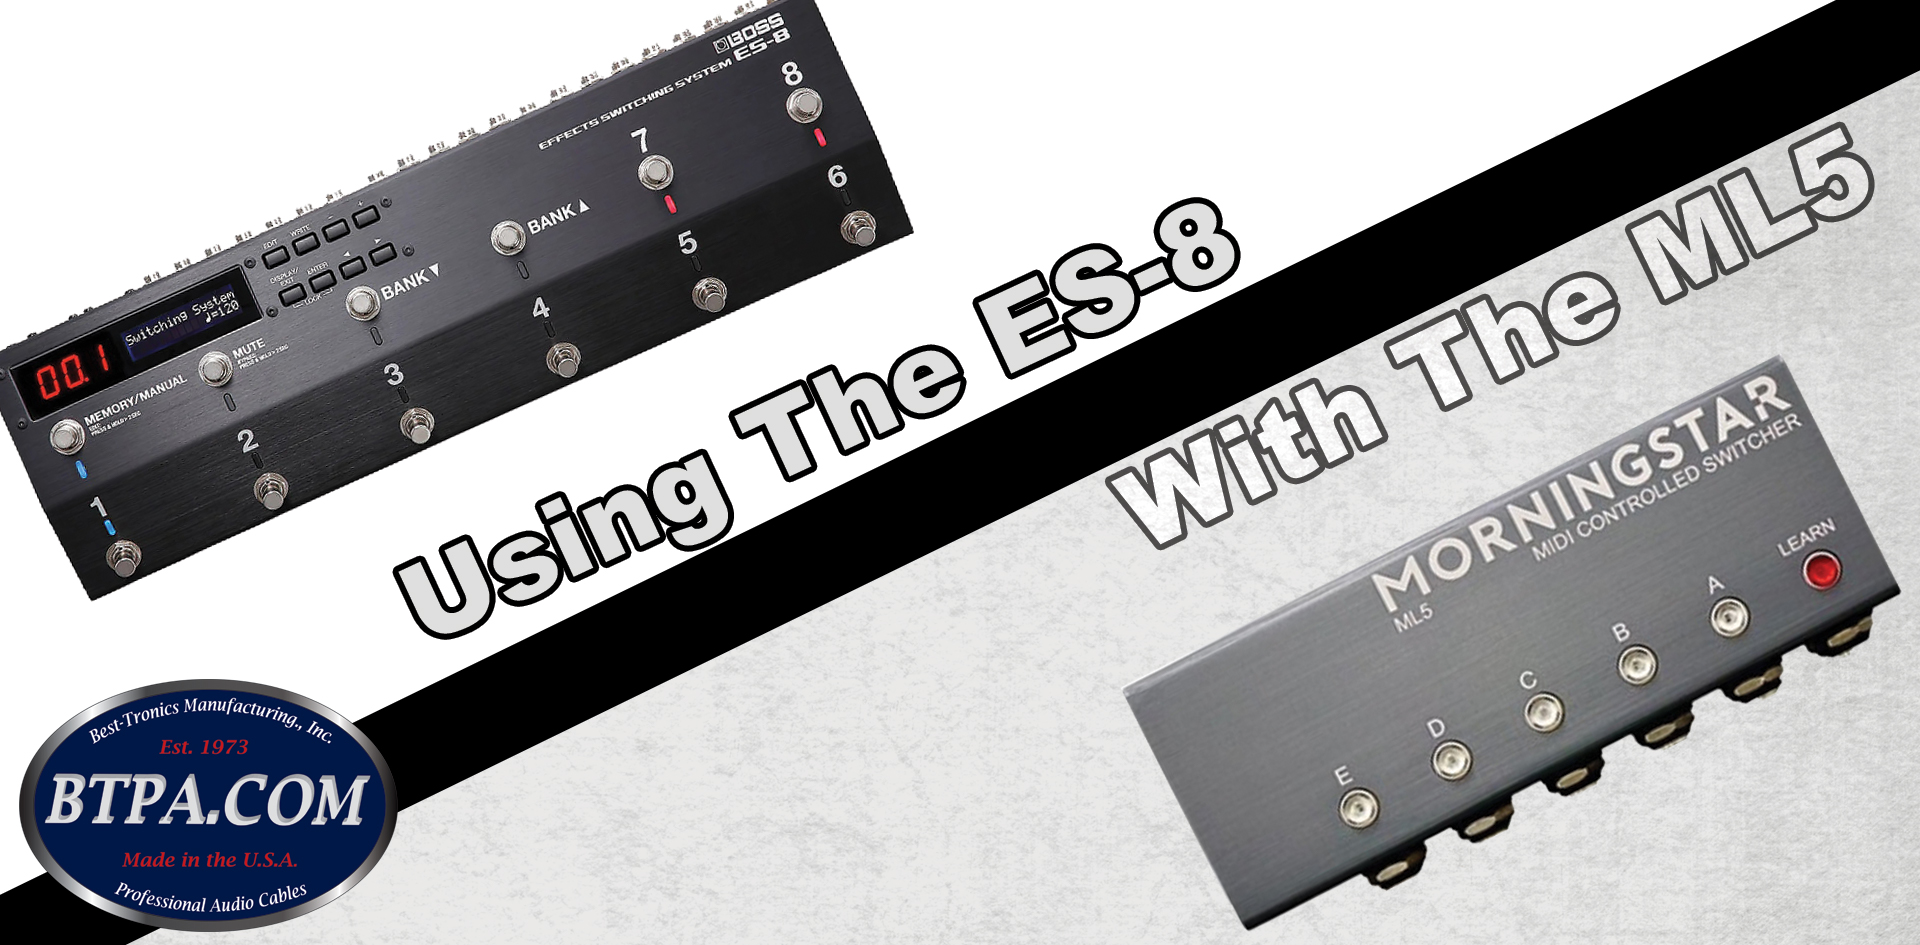 Best-Tronics Mfg., Inc. > Programming the ES-8 with the ML-5